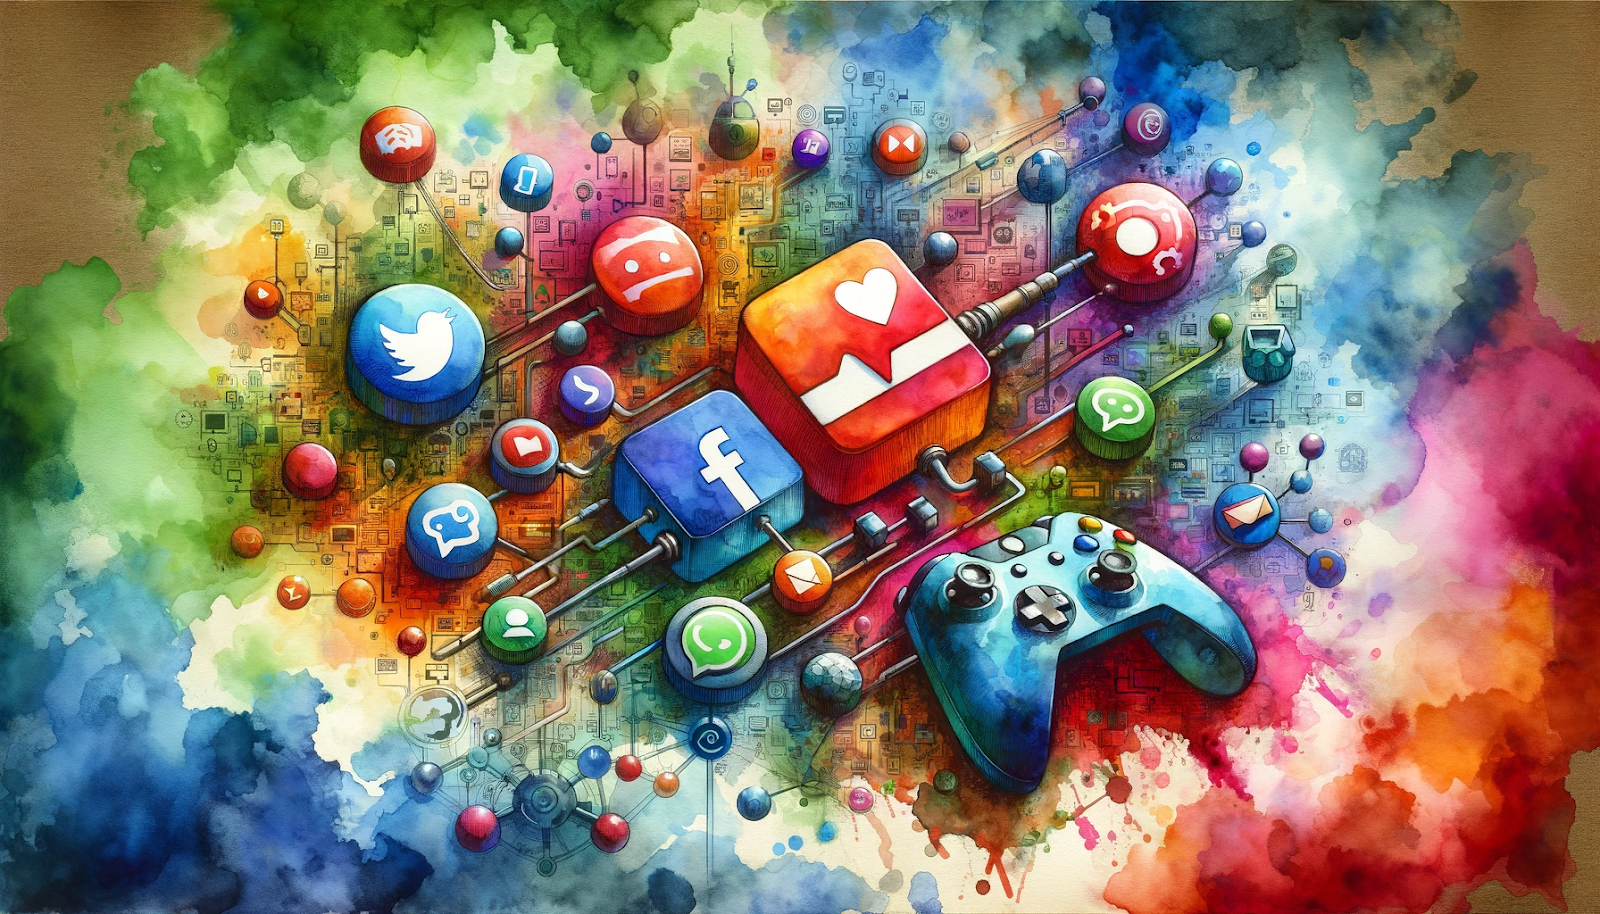 a collage featuring social media icons, gaming forums, and in-game chat bubbles, symbolizing the diverse platforms used for establishing a gaming community